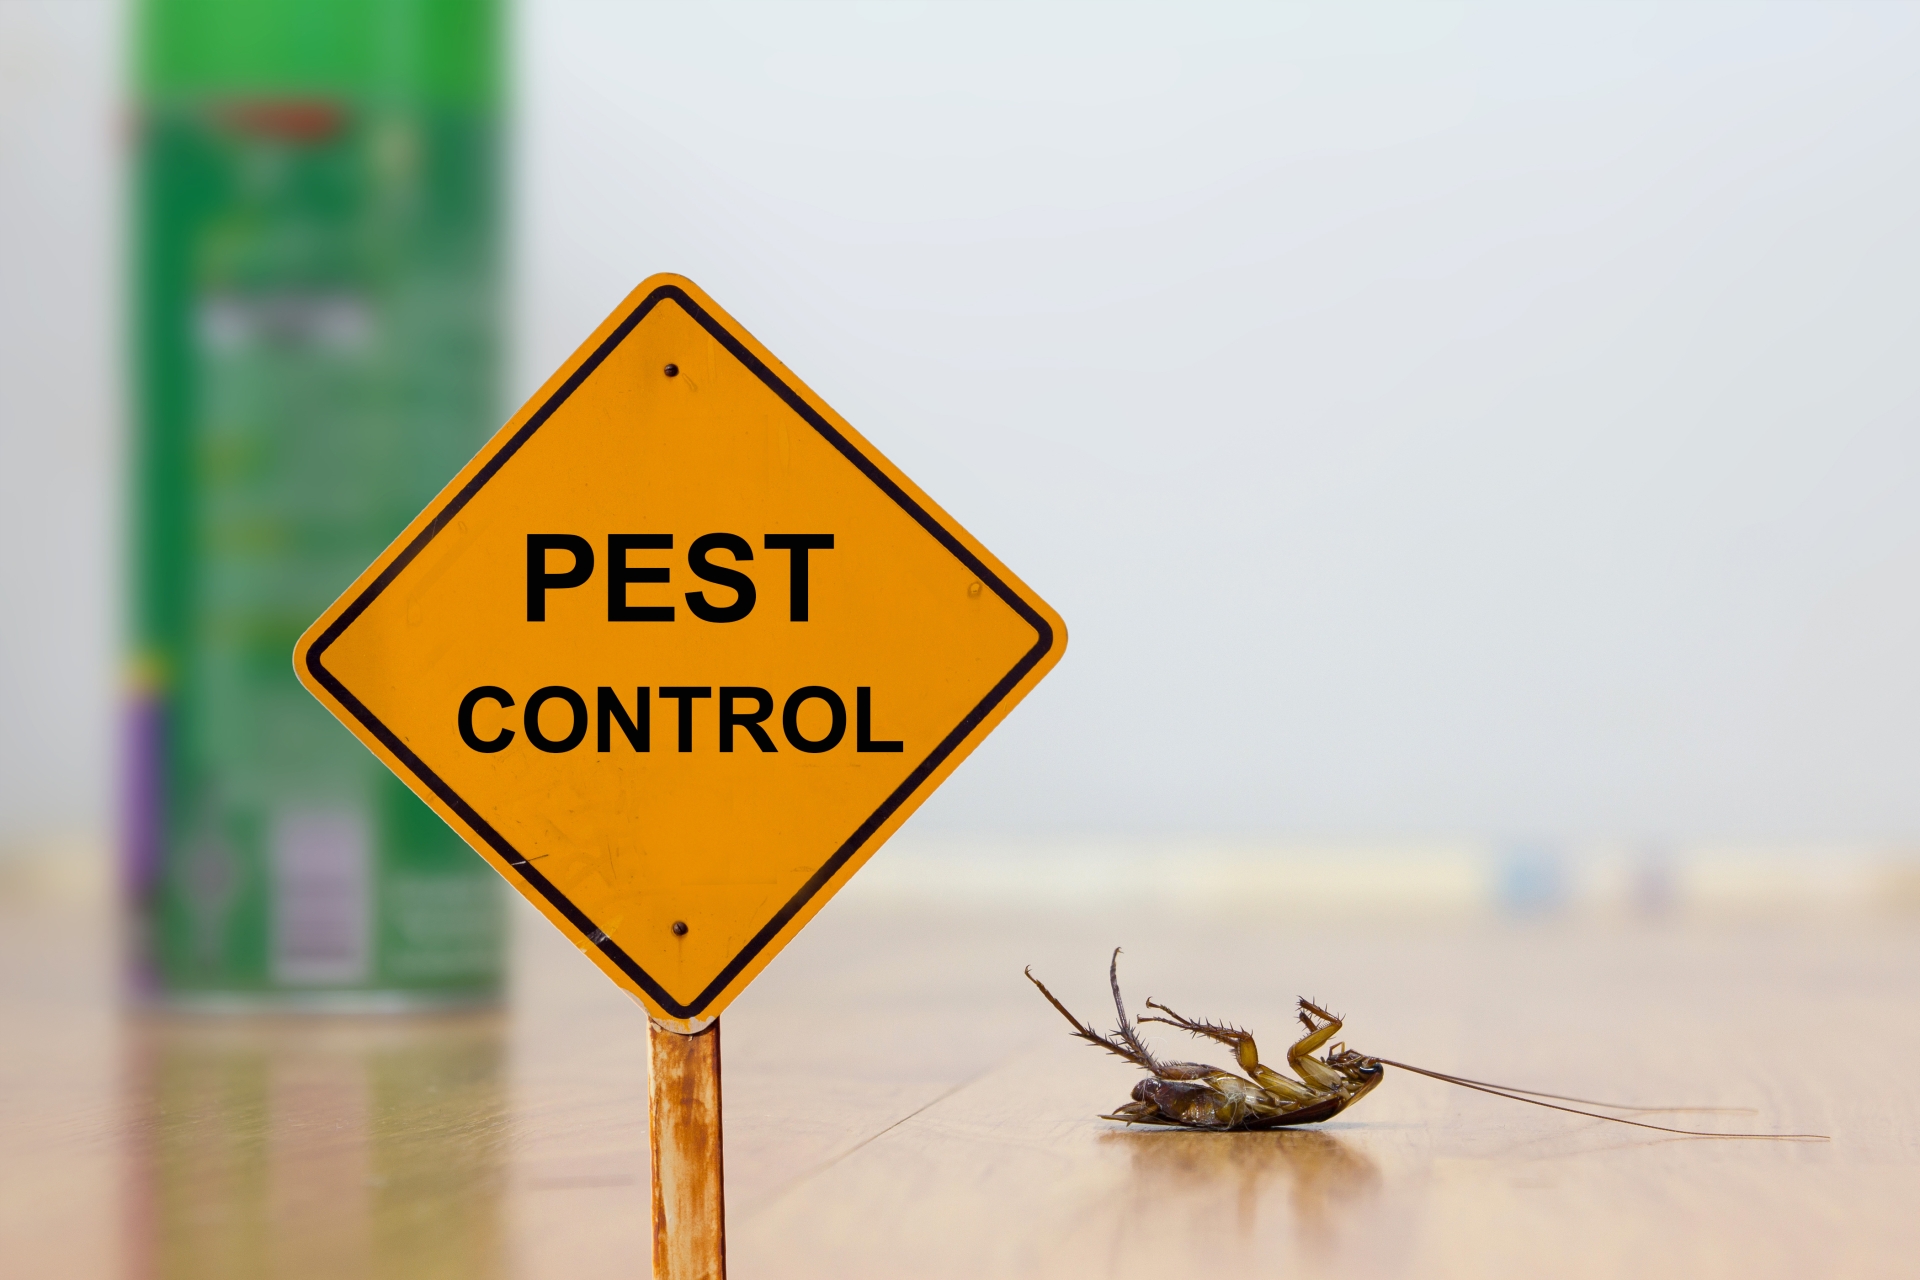 24 Hour Pest Control, Pest Control in Oxhey, South Oxhey, WD19. Call Now 020 8166 9746